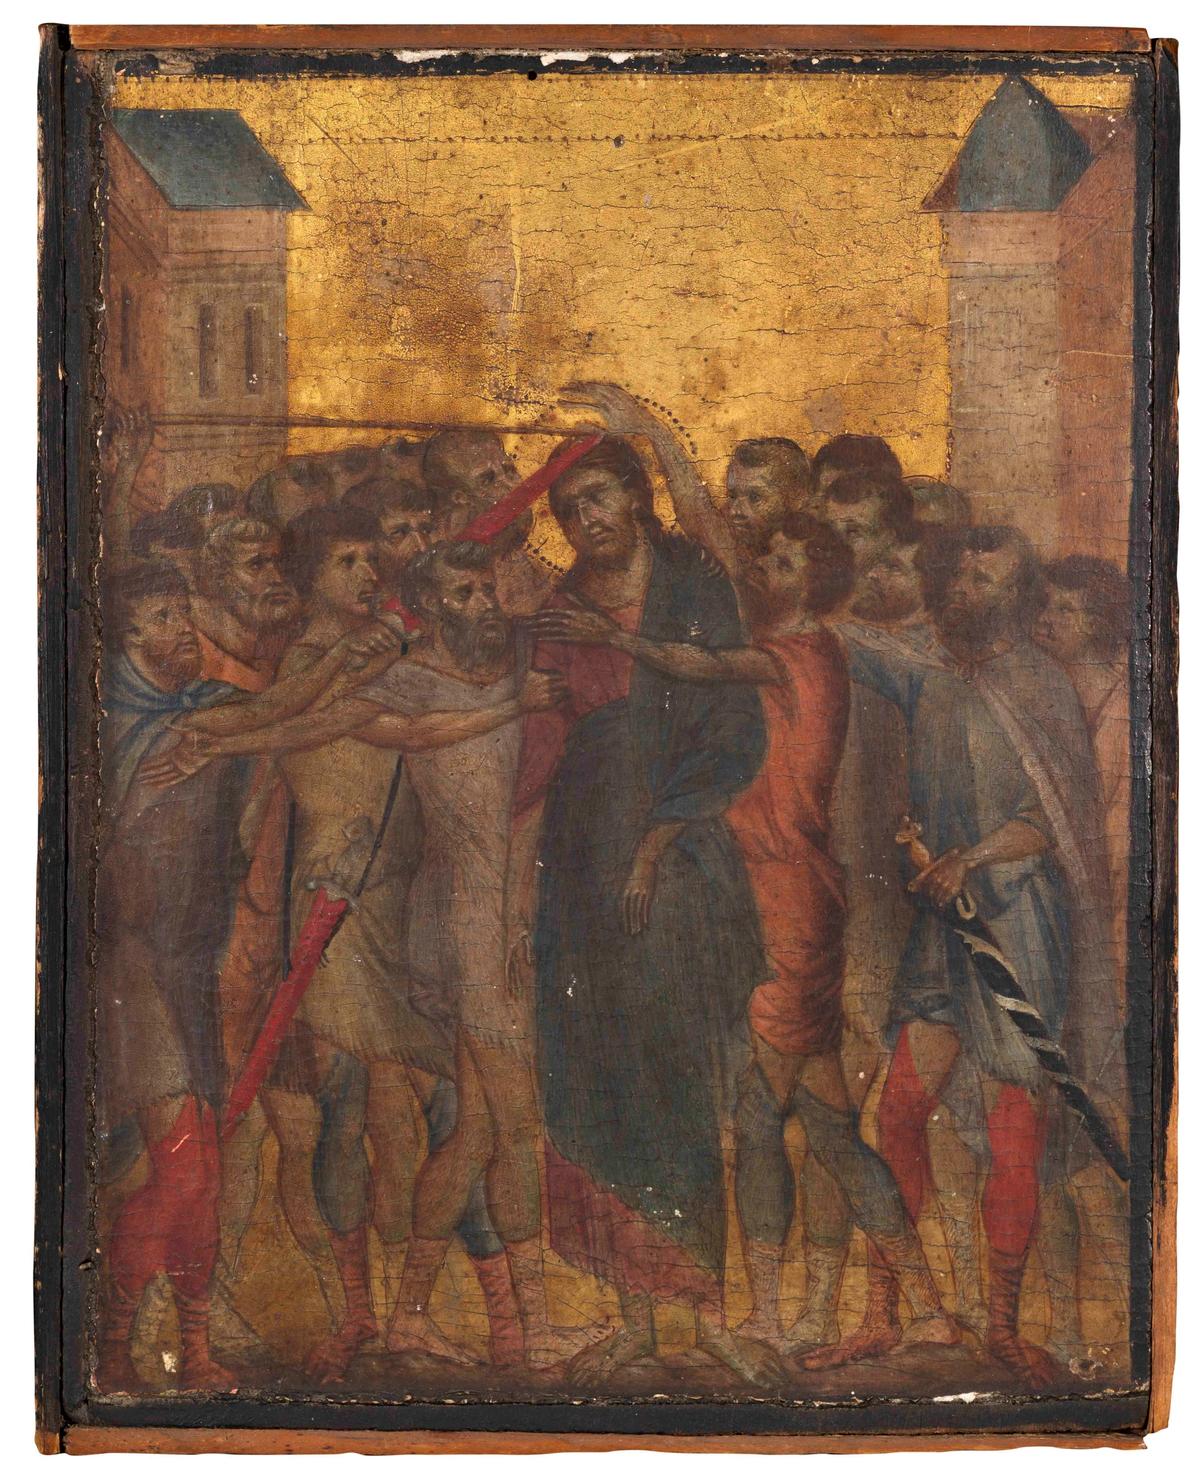 This small panel by the Florentine artist Cimabue was sold in France today for €24.1m to an anonymous collector Courtesy of Actéon and Eric Turquin